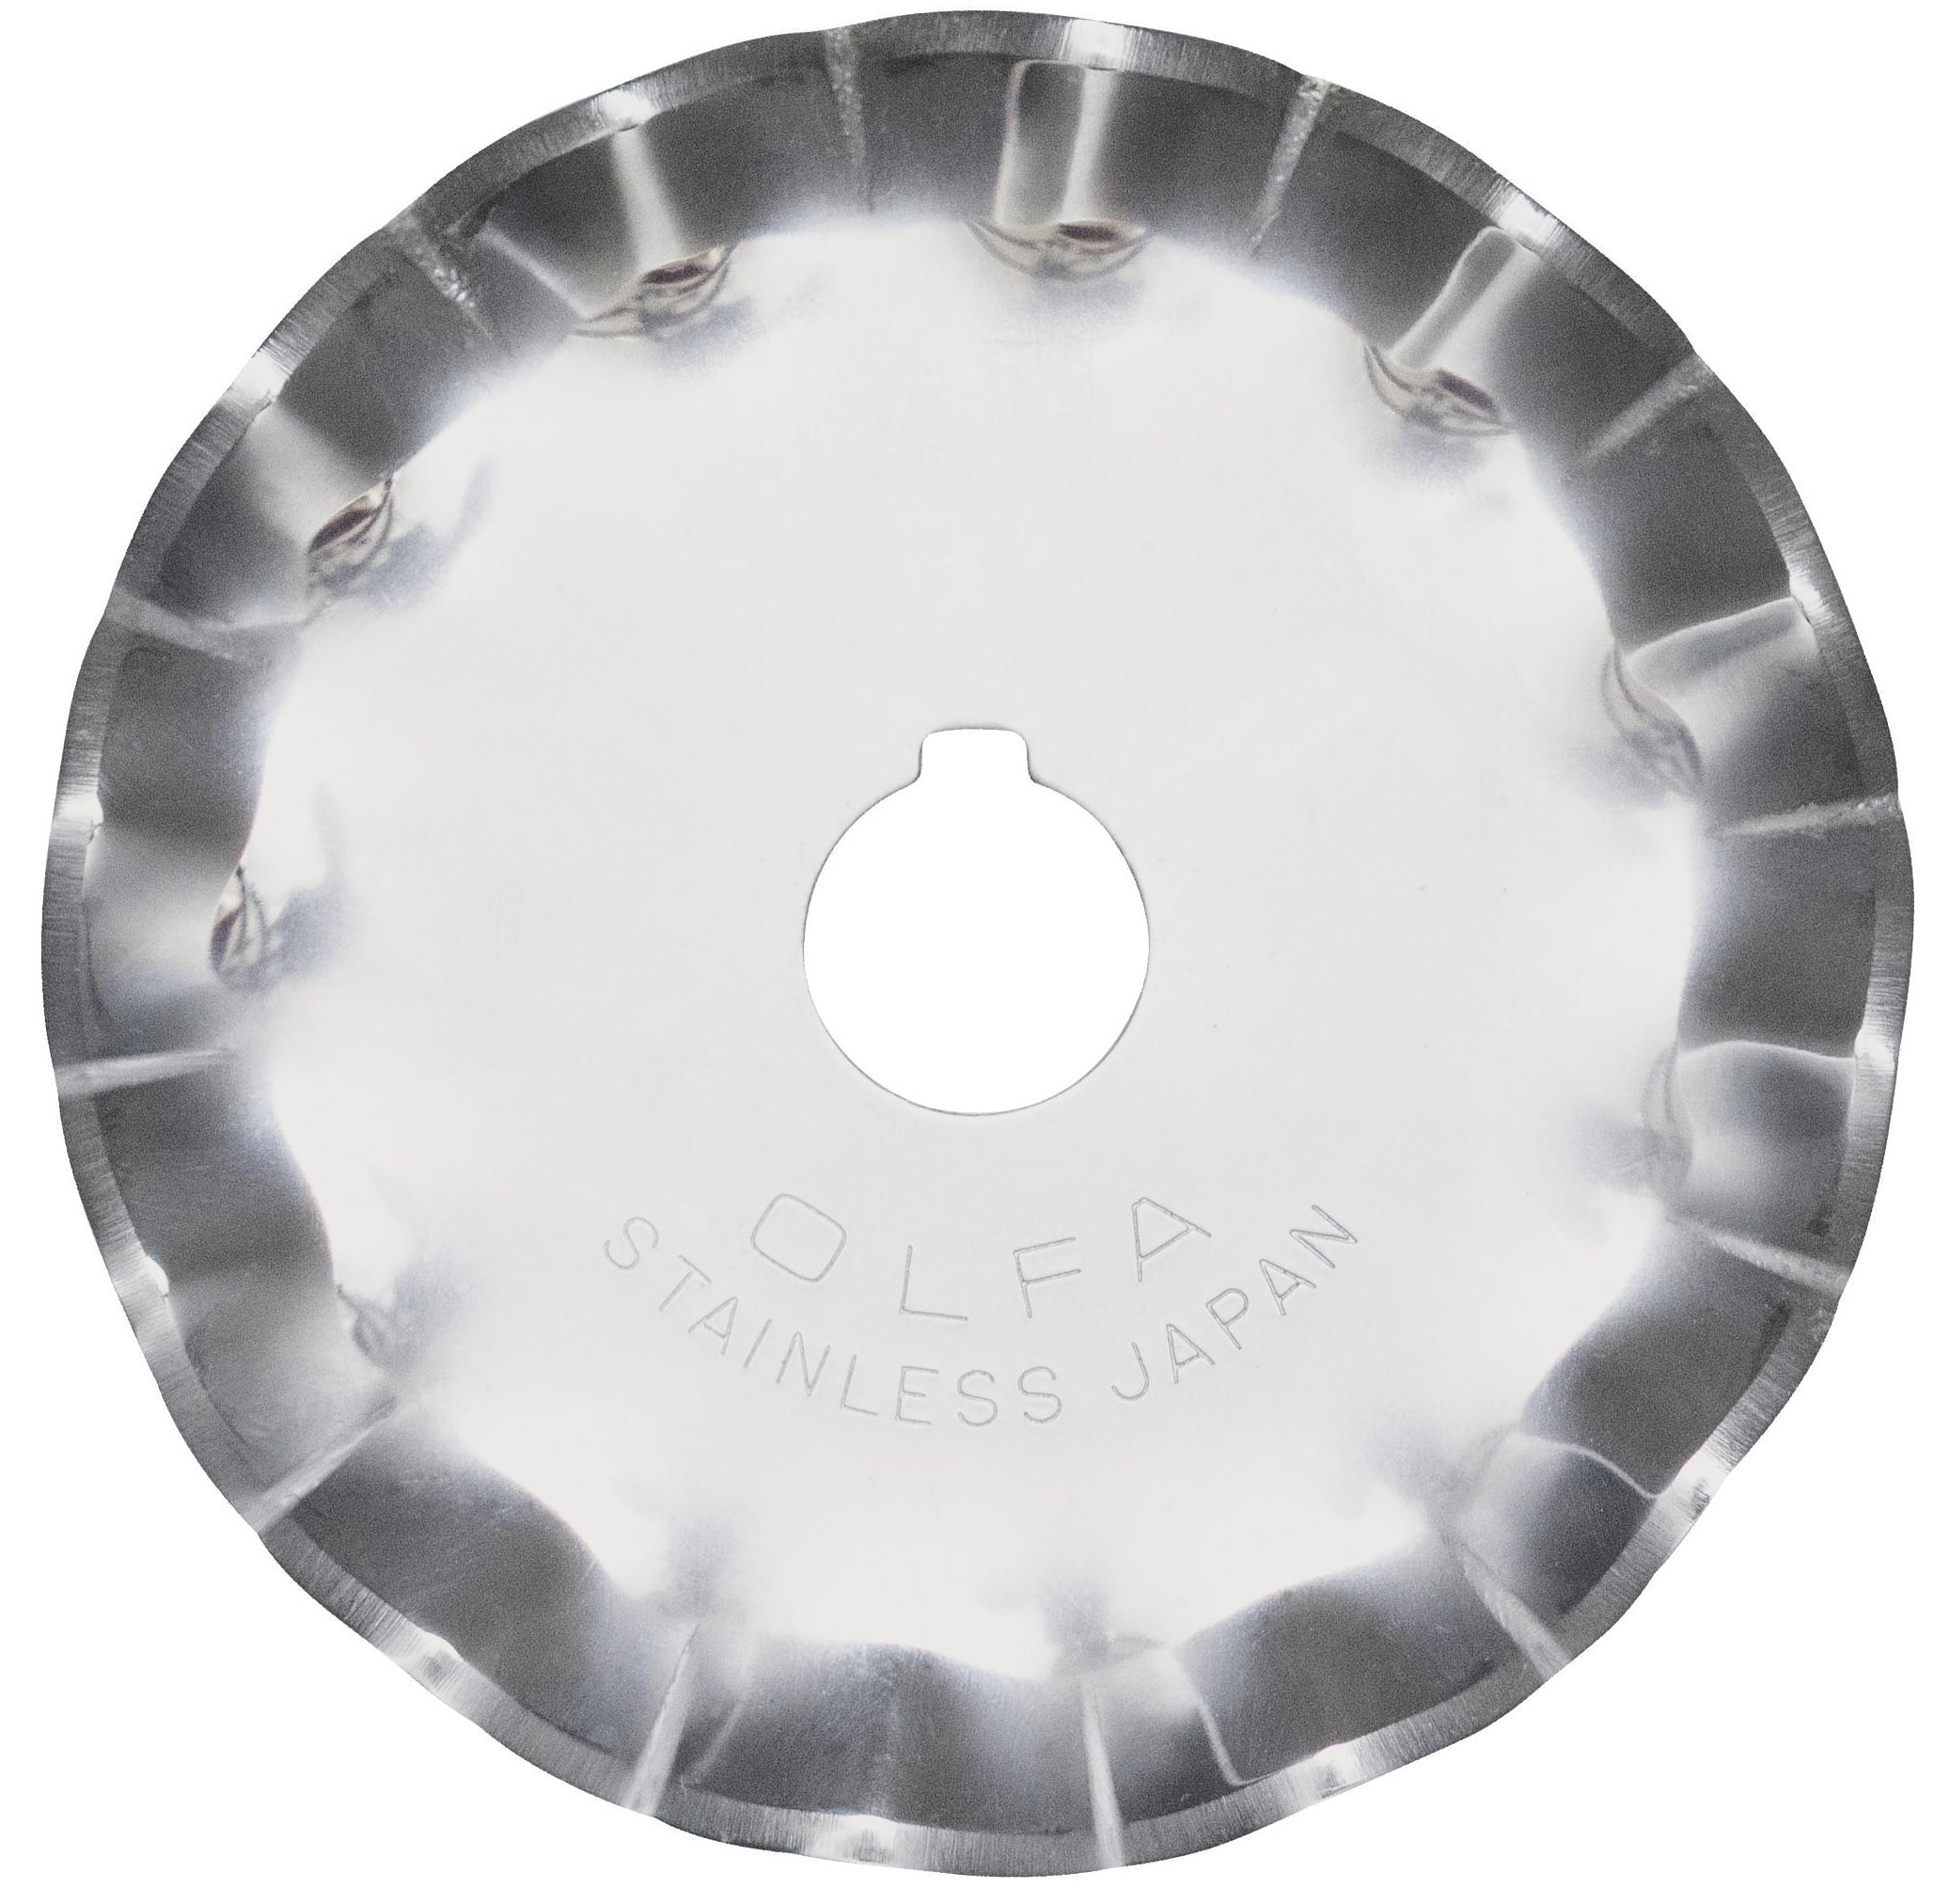 10 x 45mm Rotary Cutter Blades for Olfa Etc SKS-7 Steel by Boodle